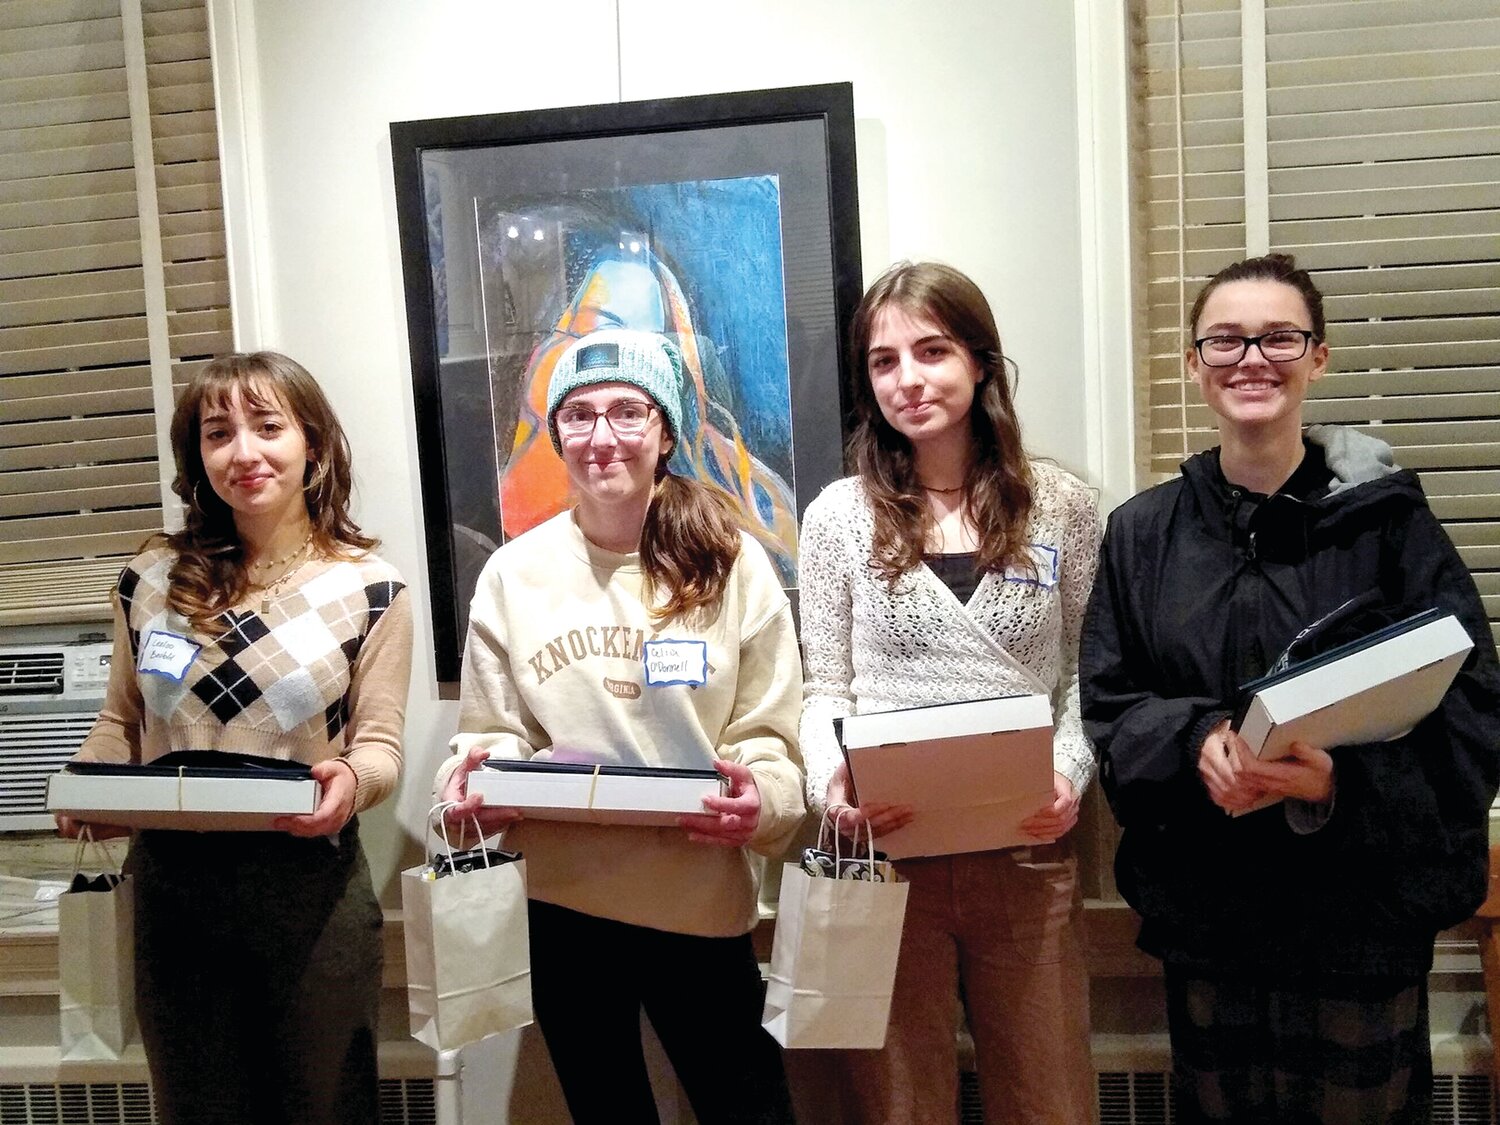 The award winners are, from left, Leeloo Boubil, Celia O’Donnell, Ella Sayers and Cailyn Convery.